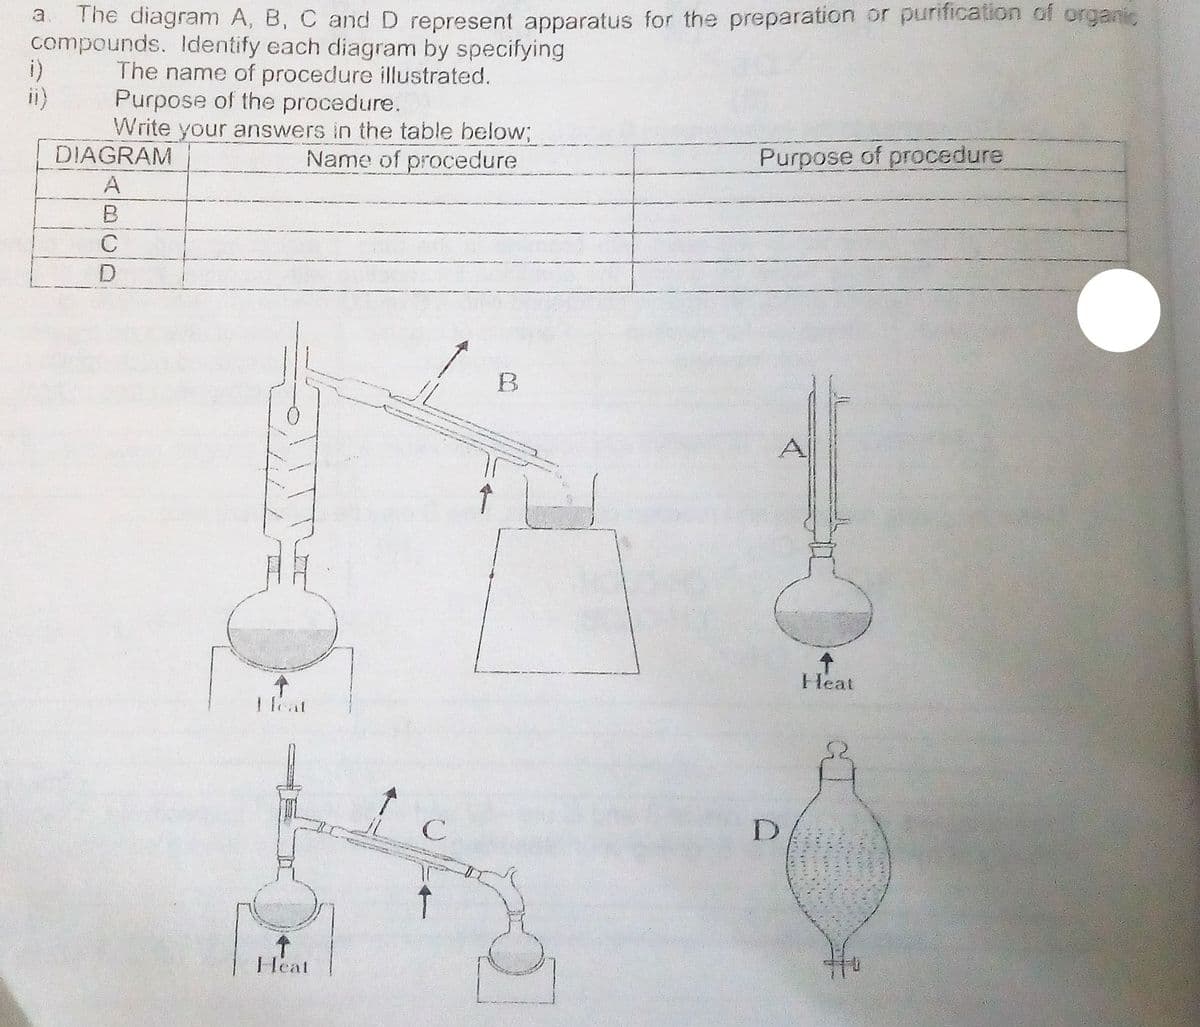 The diagram A, B, C and D represent apparatus for the preparation or purification of organic
compounds. ldentify each diagram by specifying
The name of procedure illustrated.
Purpose of the procedure.
Write your answers in the table below;
DIAGRAM
ii)
Name of procedure
Purpose of procedure
Heat
1eat
Heat
ABCD
